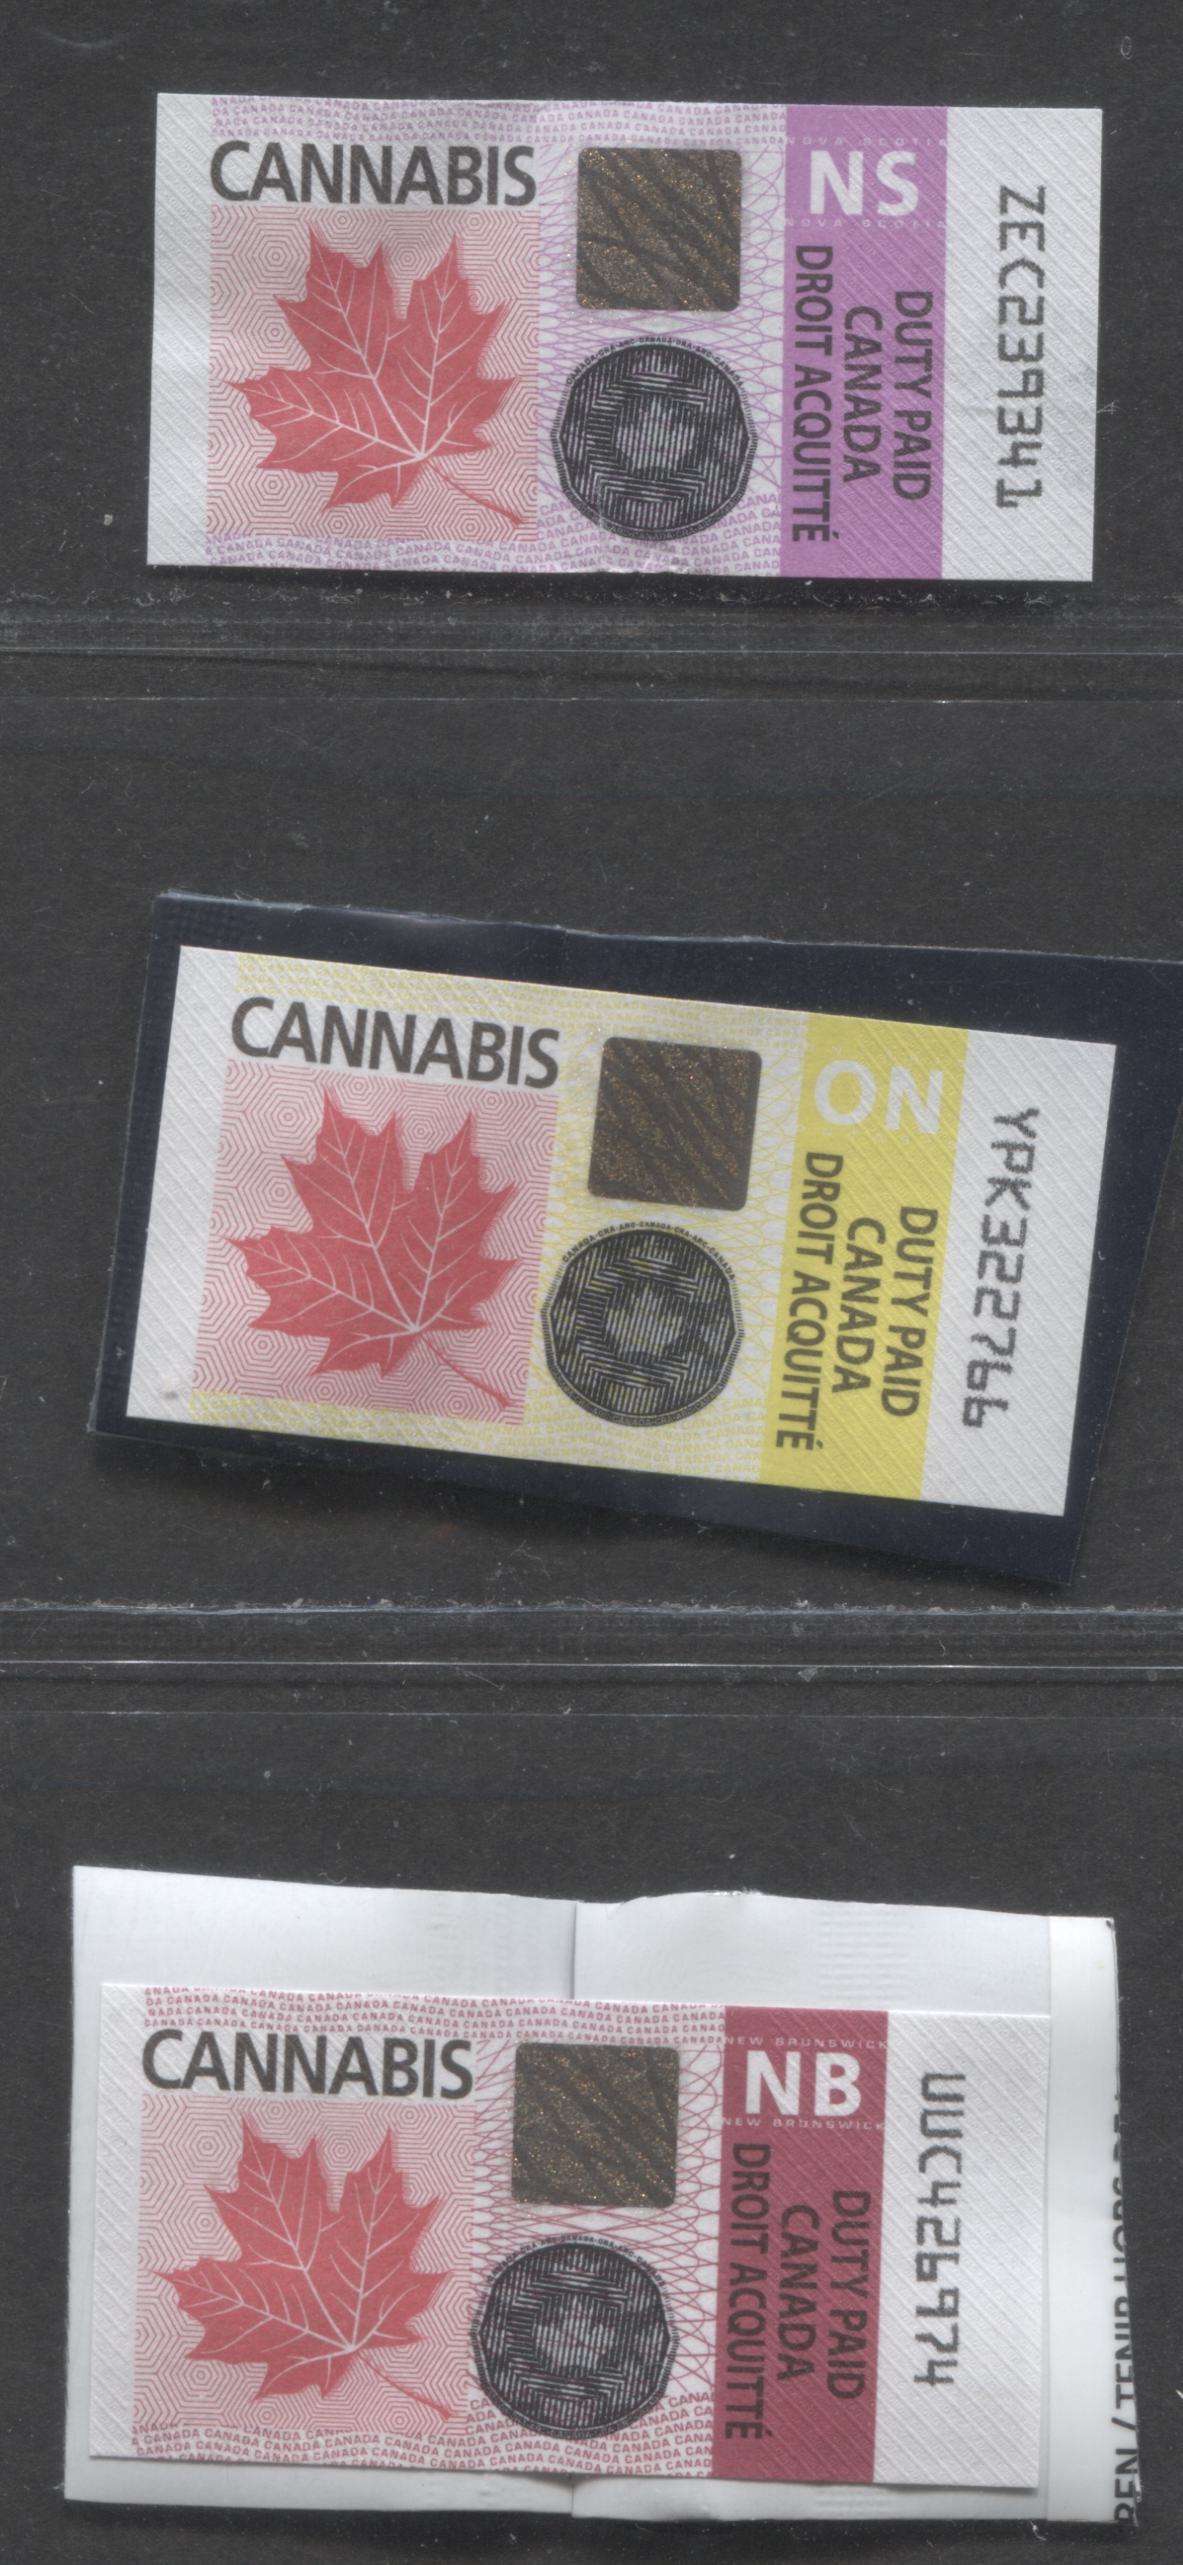 Lot 6 Canada, Multicolored Maple Leaf,  Ontario, N.S & N.B Cannabis, 3 Fine to Very Fine Used Stamps With A Small Tear In The Off-Package Nova Scotia Stamp, Unlisted In Van Dam